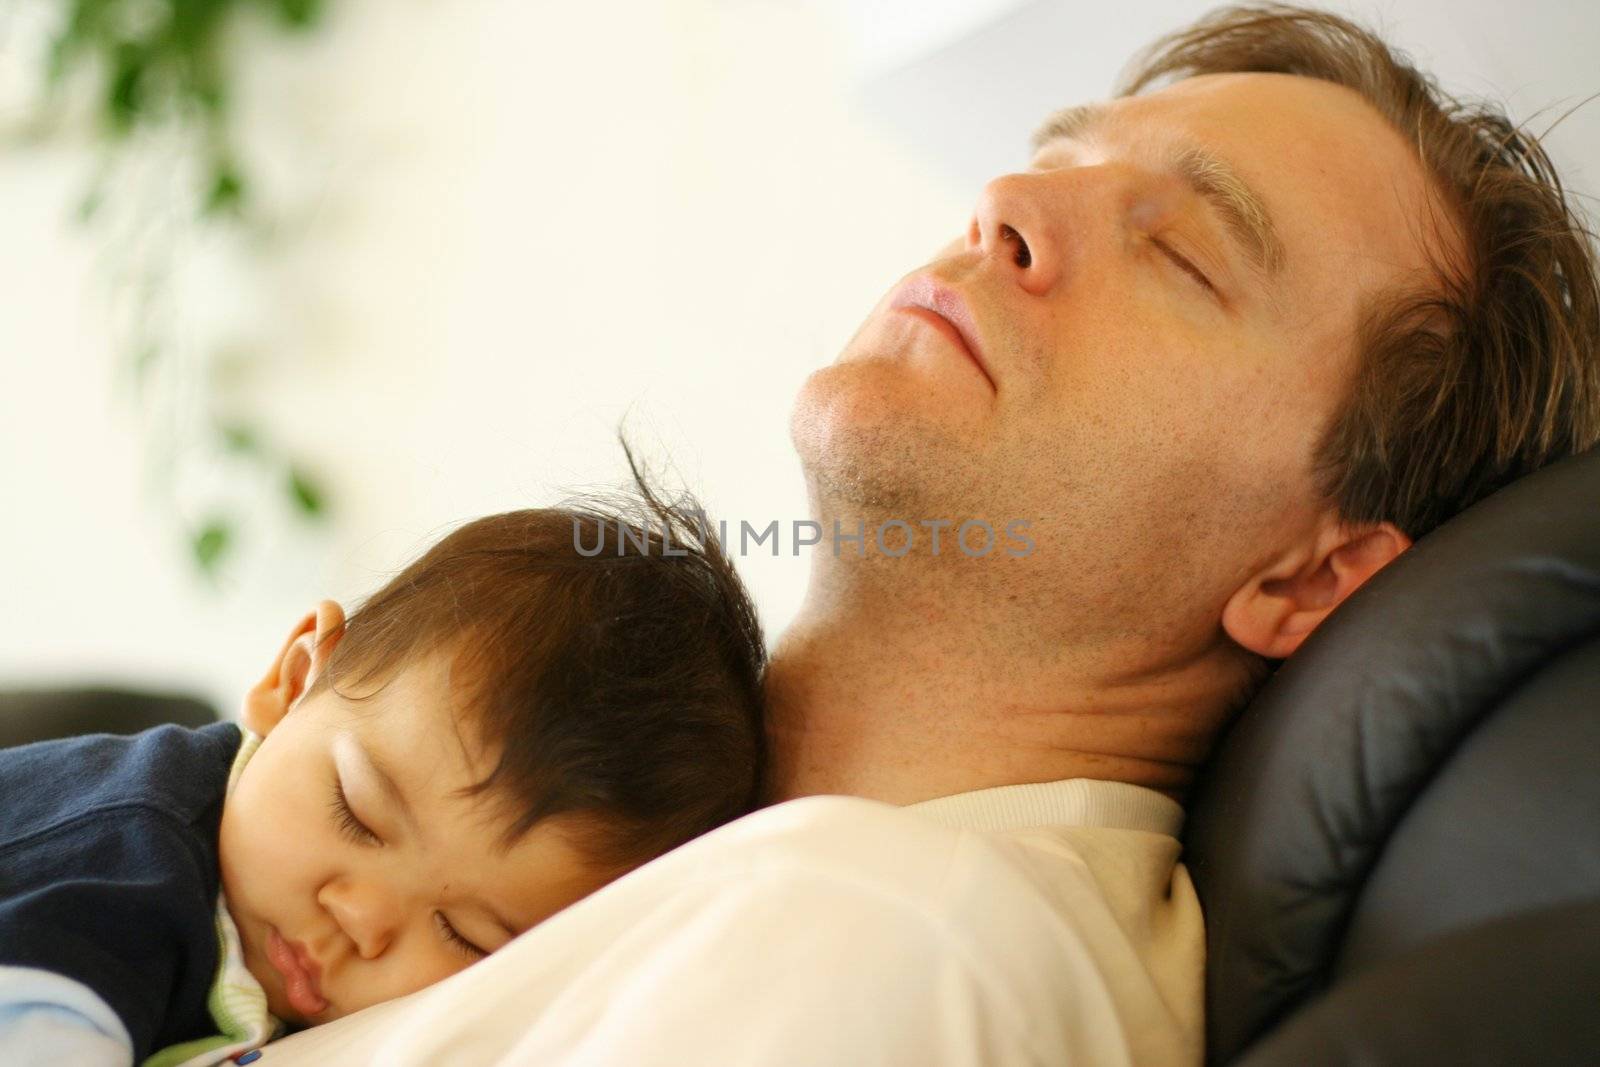 Baby asleep on his father's chest.